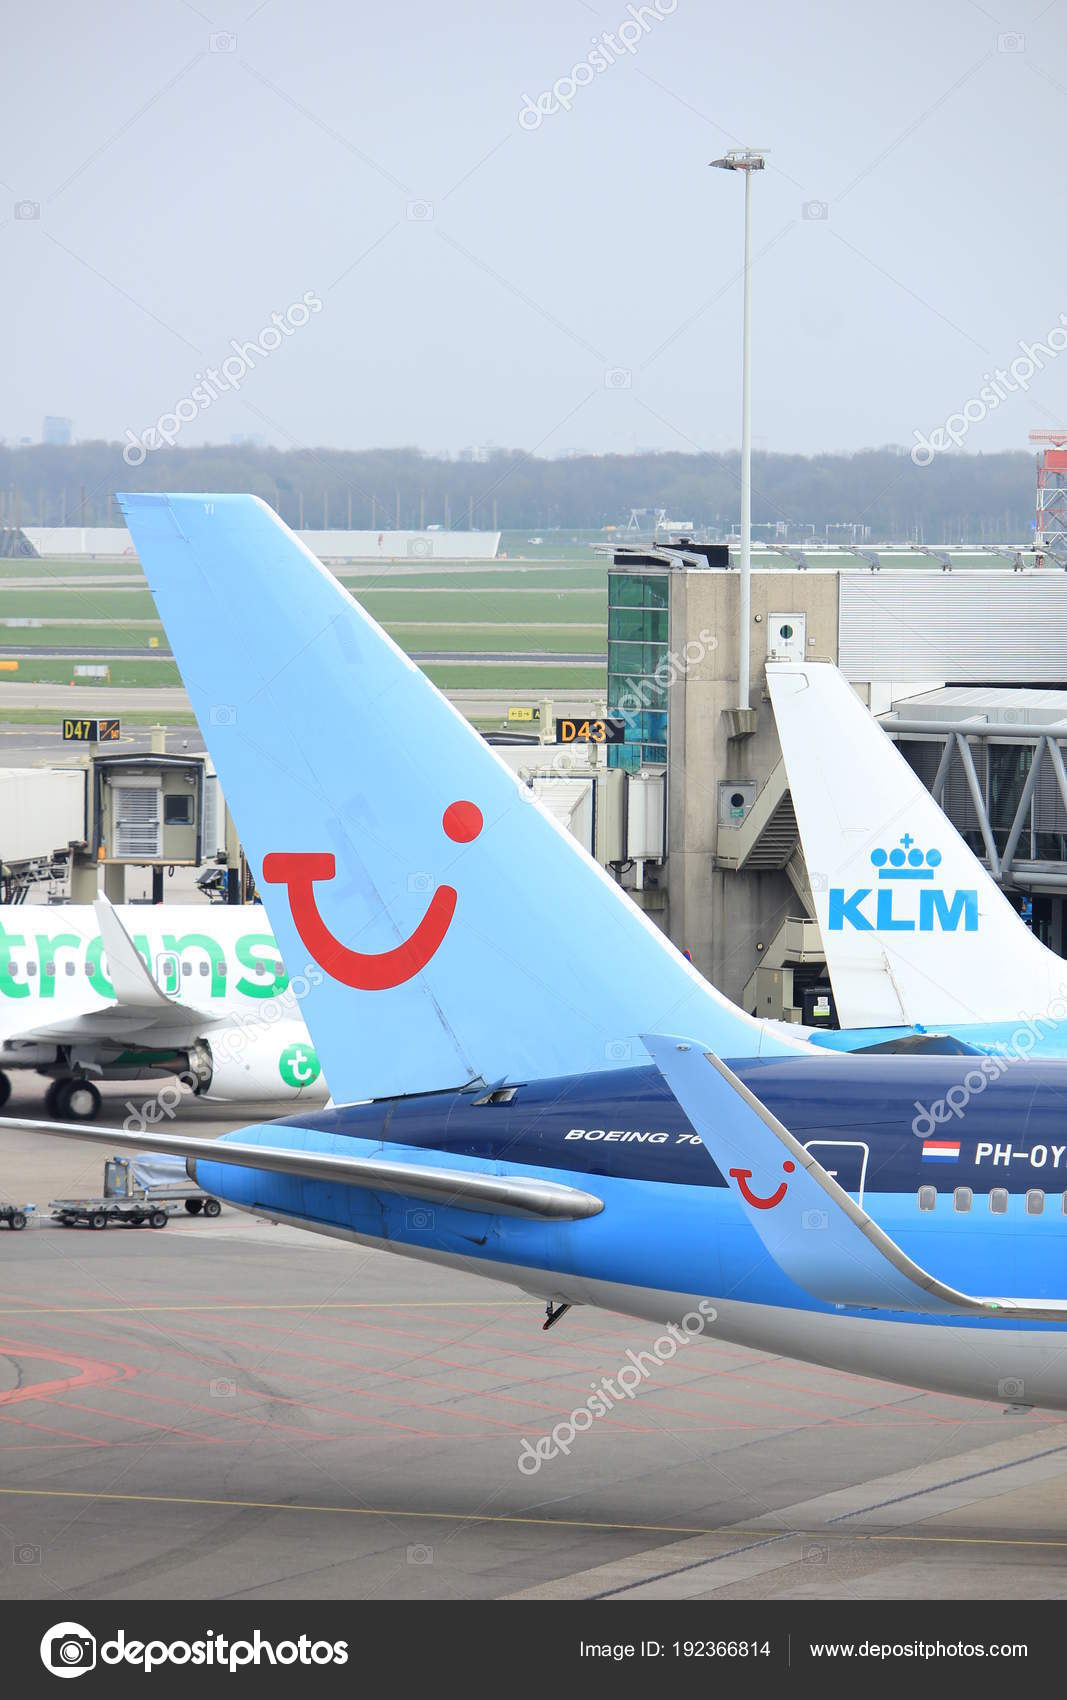 Amsterdam Airport Schiphol The Netherlands April 14th 2018